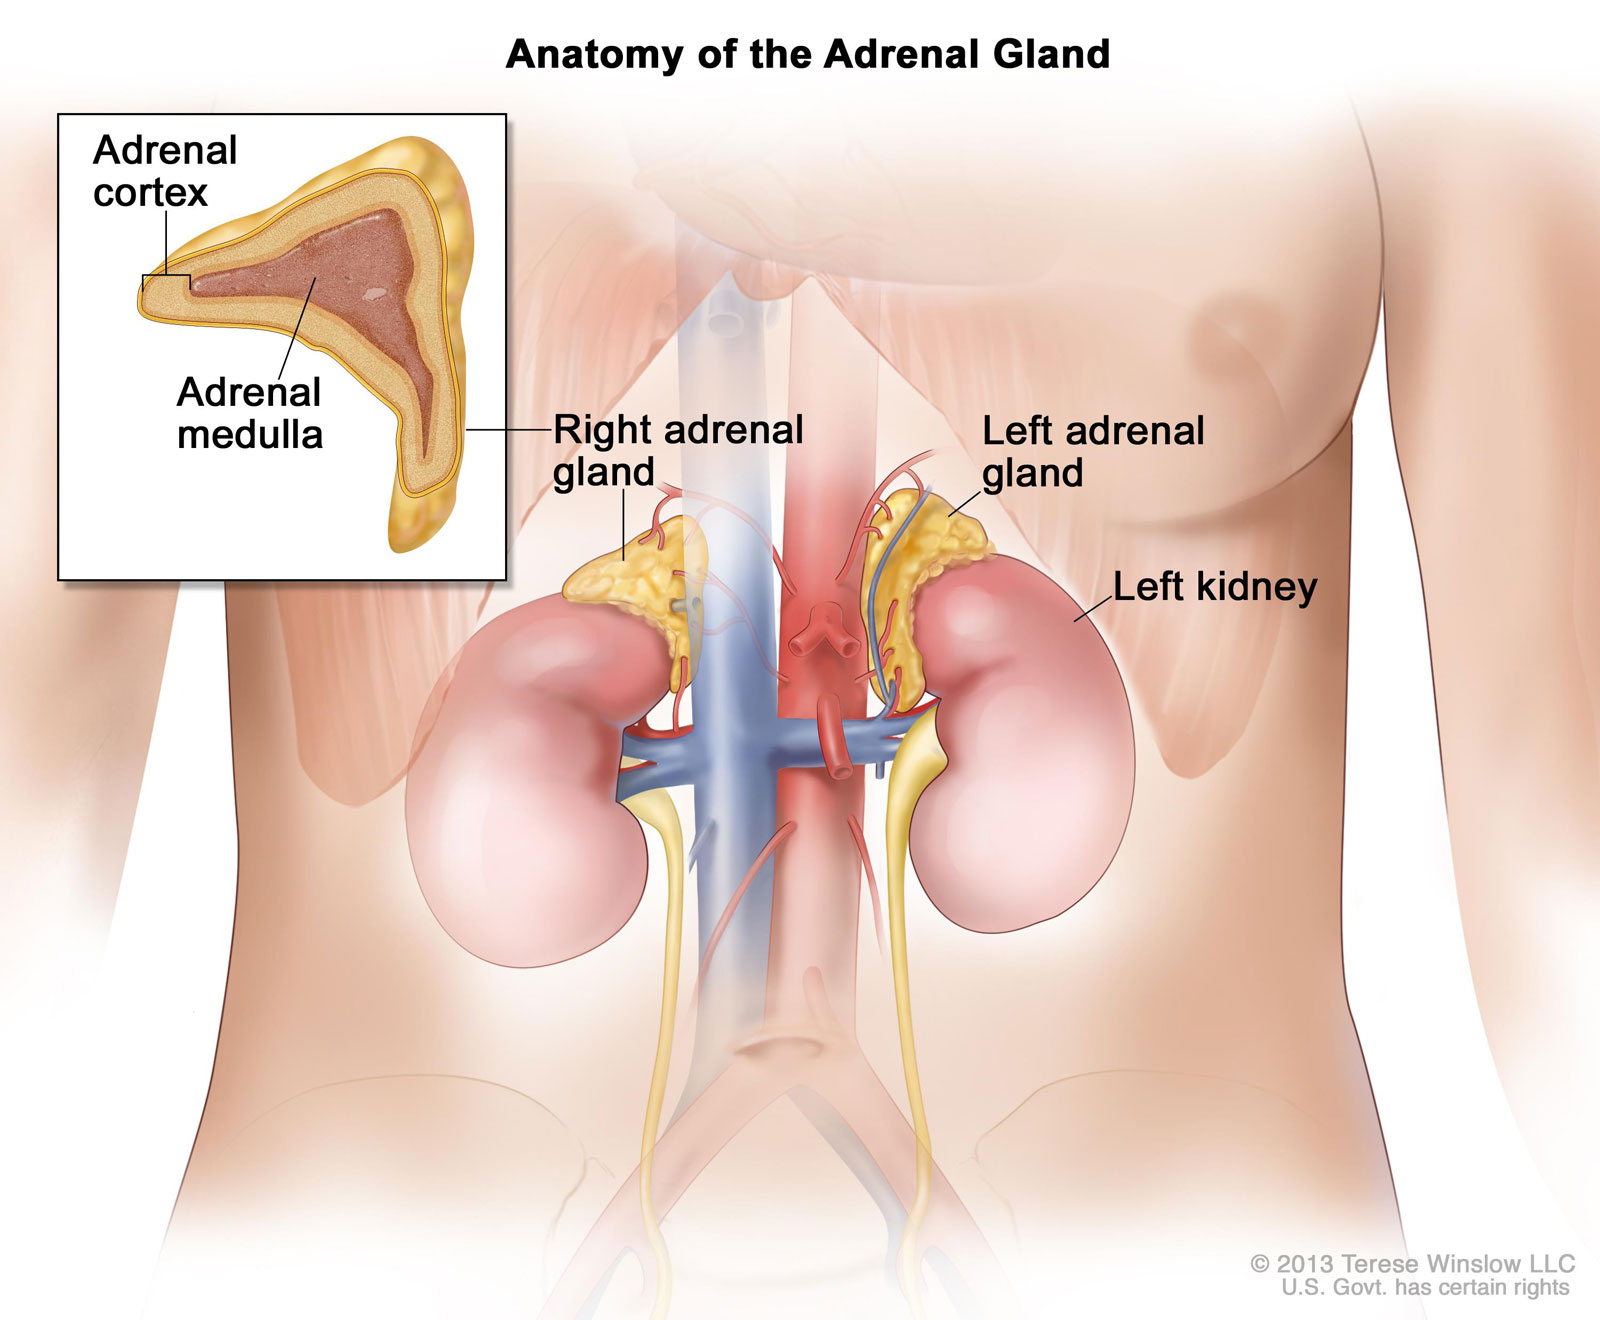 CDR739009 Anatomy Of The Adrenal Gland Winslow